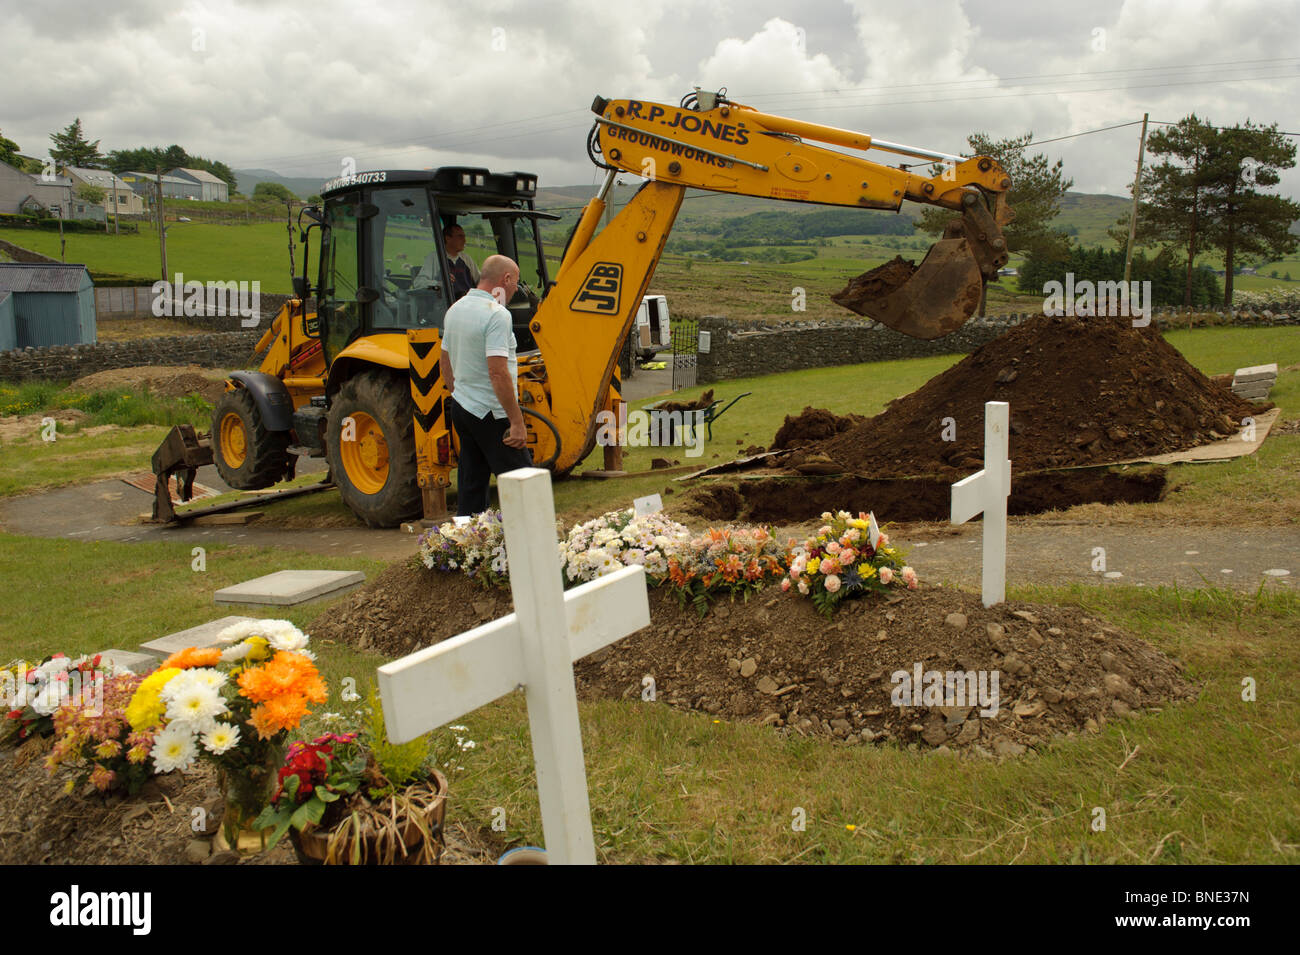 Contractor digging grave with a JCB digger in Steshon village near Trawsfynydd, Snowdonia National Park, Gwynedd North Wales UK Stock Photo